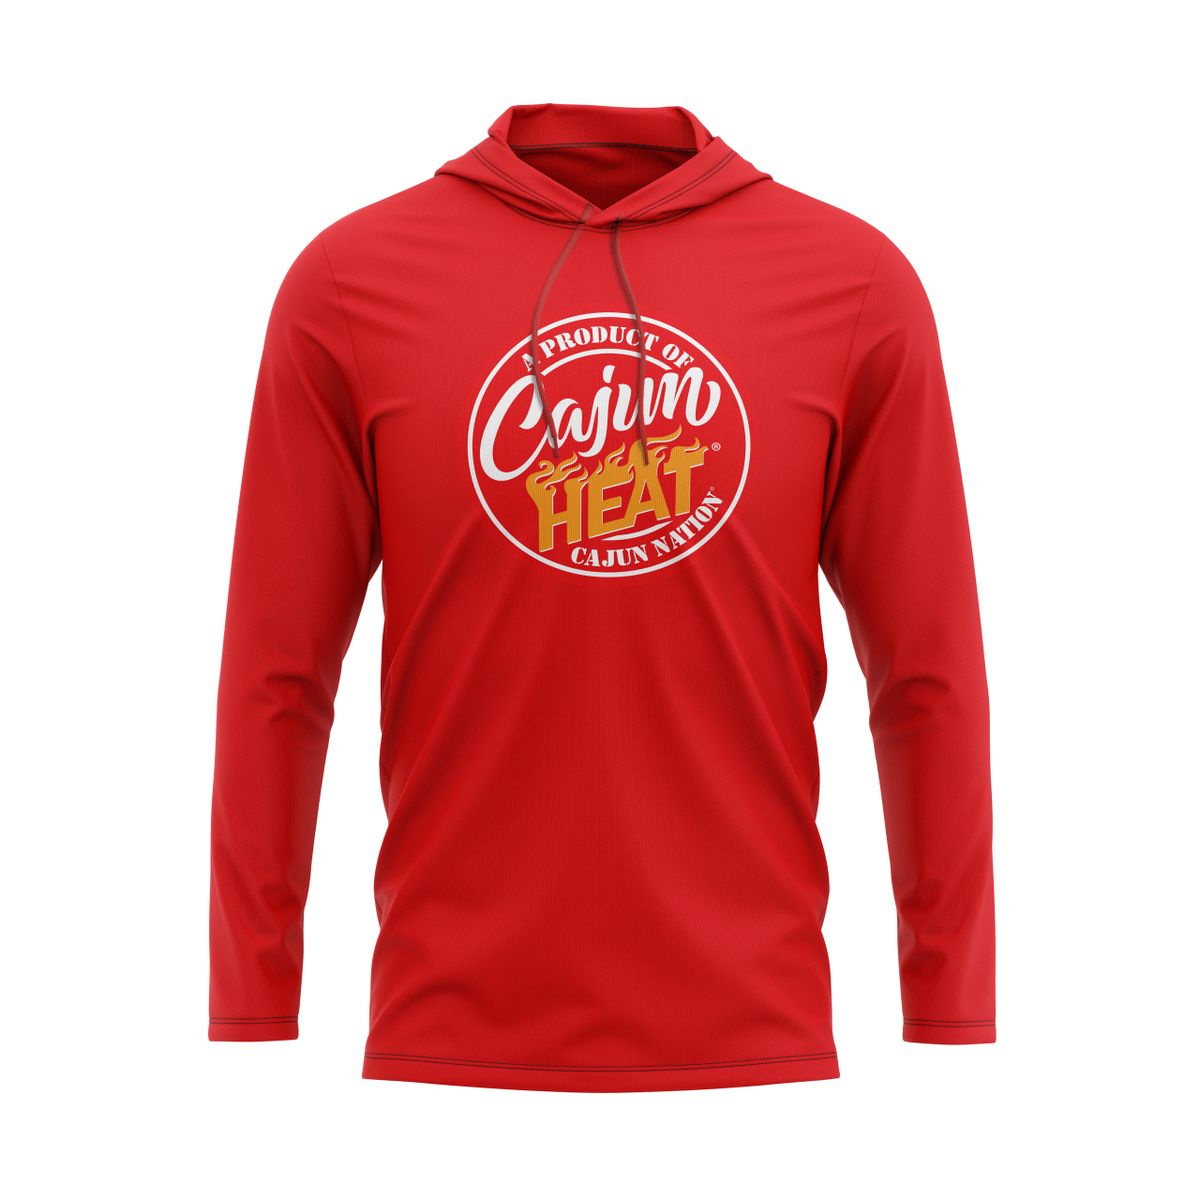  Cajun Heat Red Lightweight Pullover Hoodie - 4.3 oz., 100% combed ring spun cotton, 32 singles Heather colors are 65/35 polyester/ringspun cotton Relaxed unlined hood with contrast drawcord Double-needle neck, sleeve and bottom hem Tubular construction Plastisol print